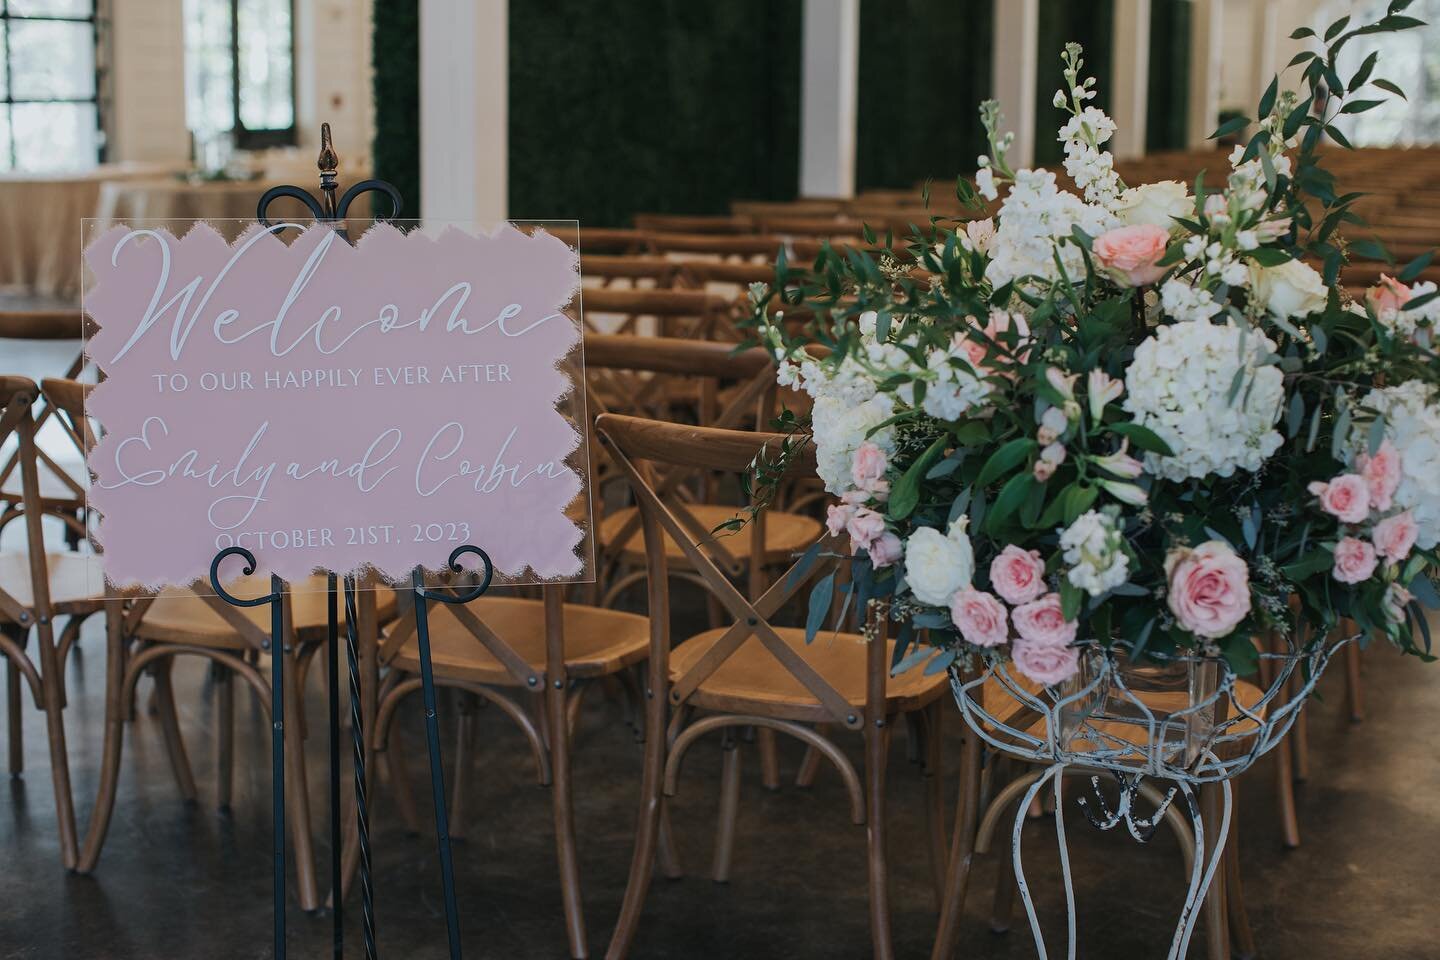 Emily + Corbin ✨ 10.21.23

This color is one of my favorites and looks absolutely stunning in the venue! Maybe I have to incorporate more dusty rose in my every day 💐 

📷 : @shelbyreneephoto 
💍: @emilygarrett31 and @corbz49 
⛪️: @robinshawvenue 

